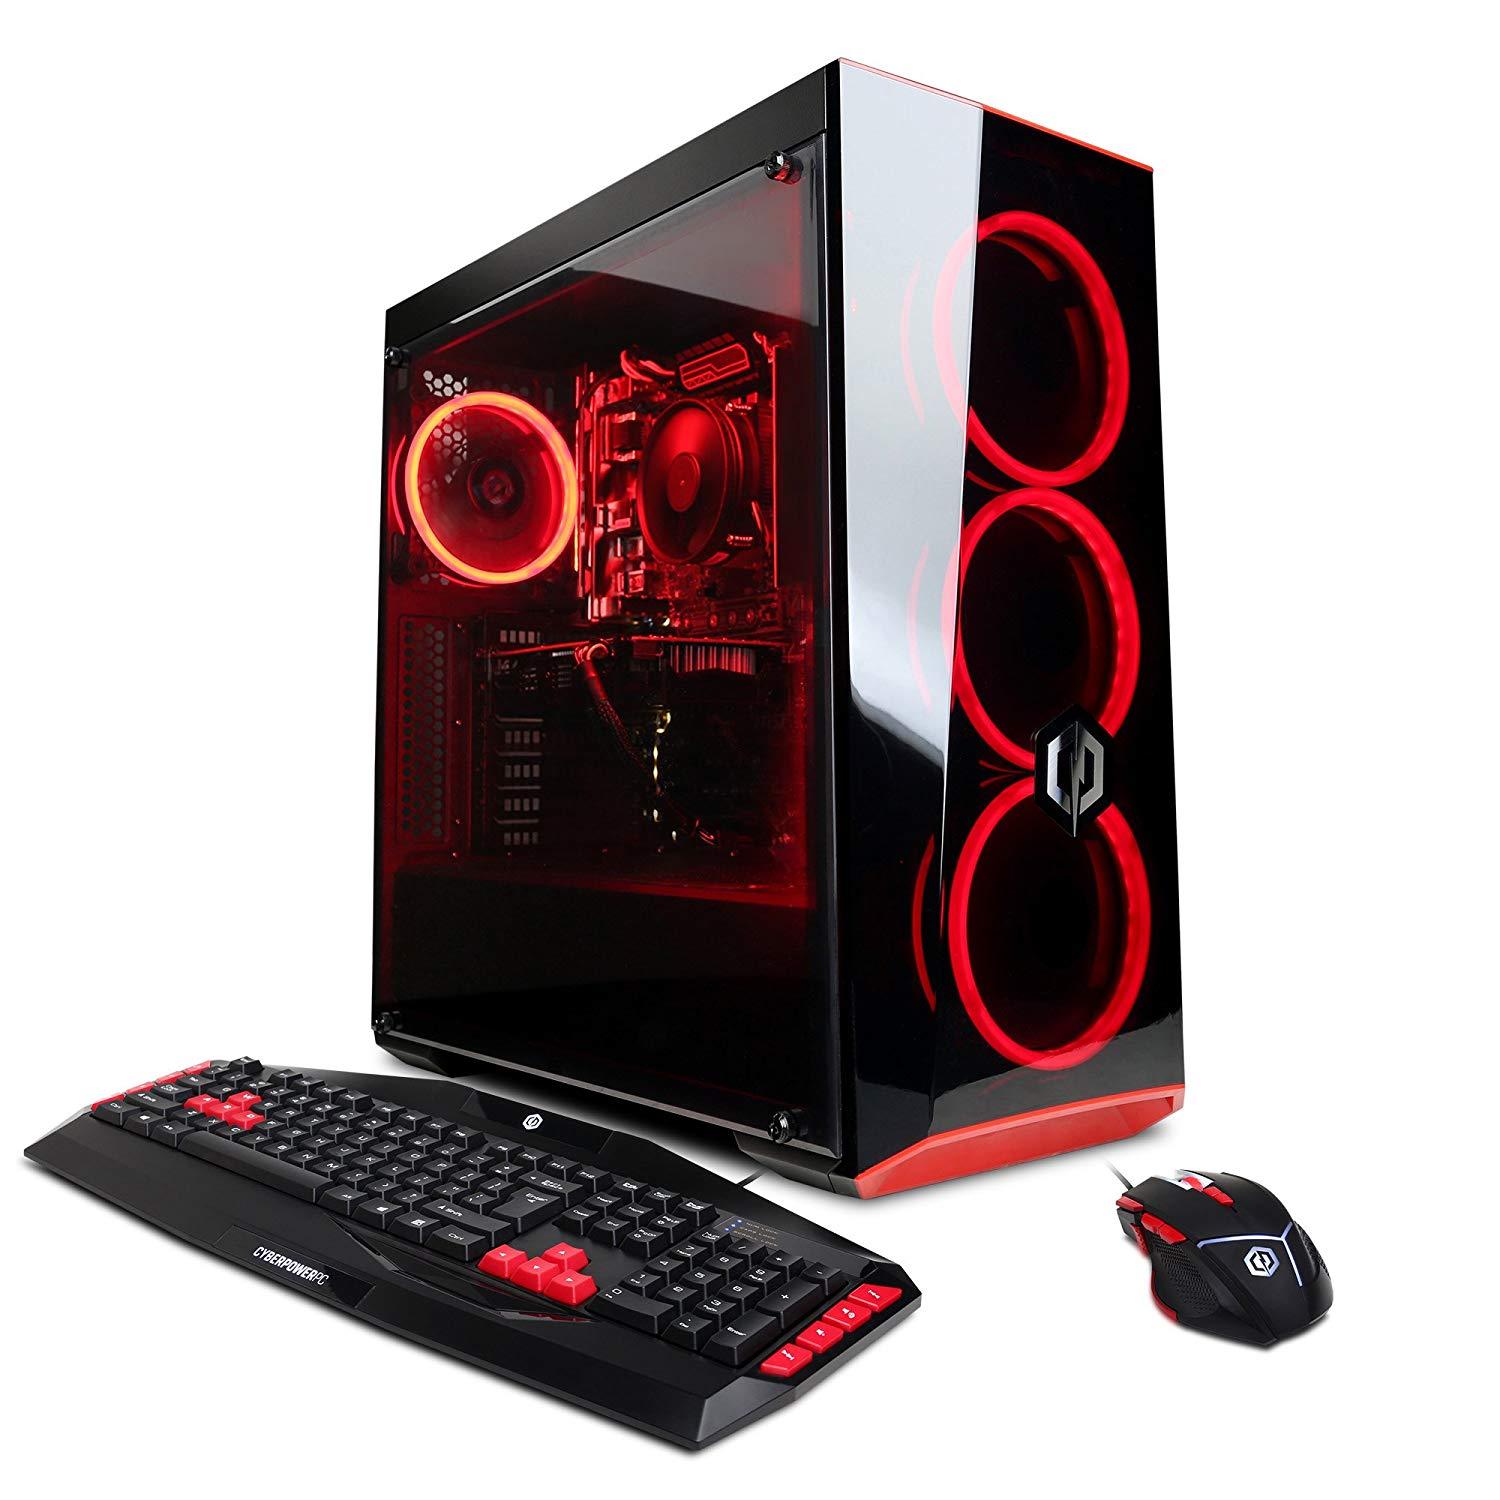 The Red Devil Build - Store 974 | ستور ٩٧٤